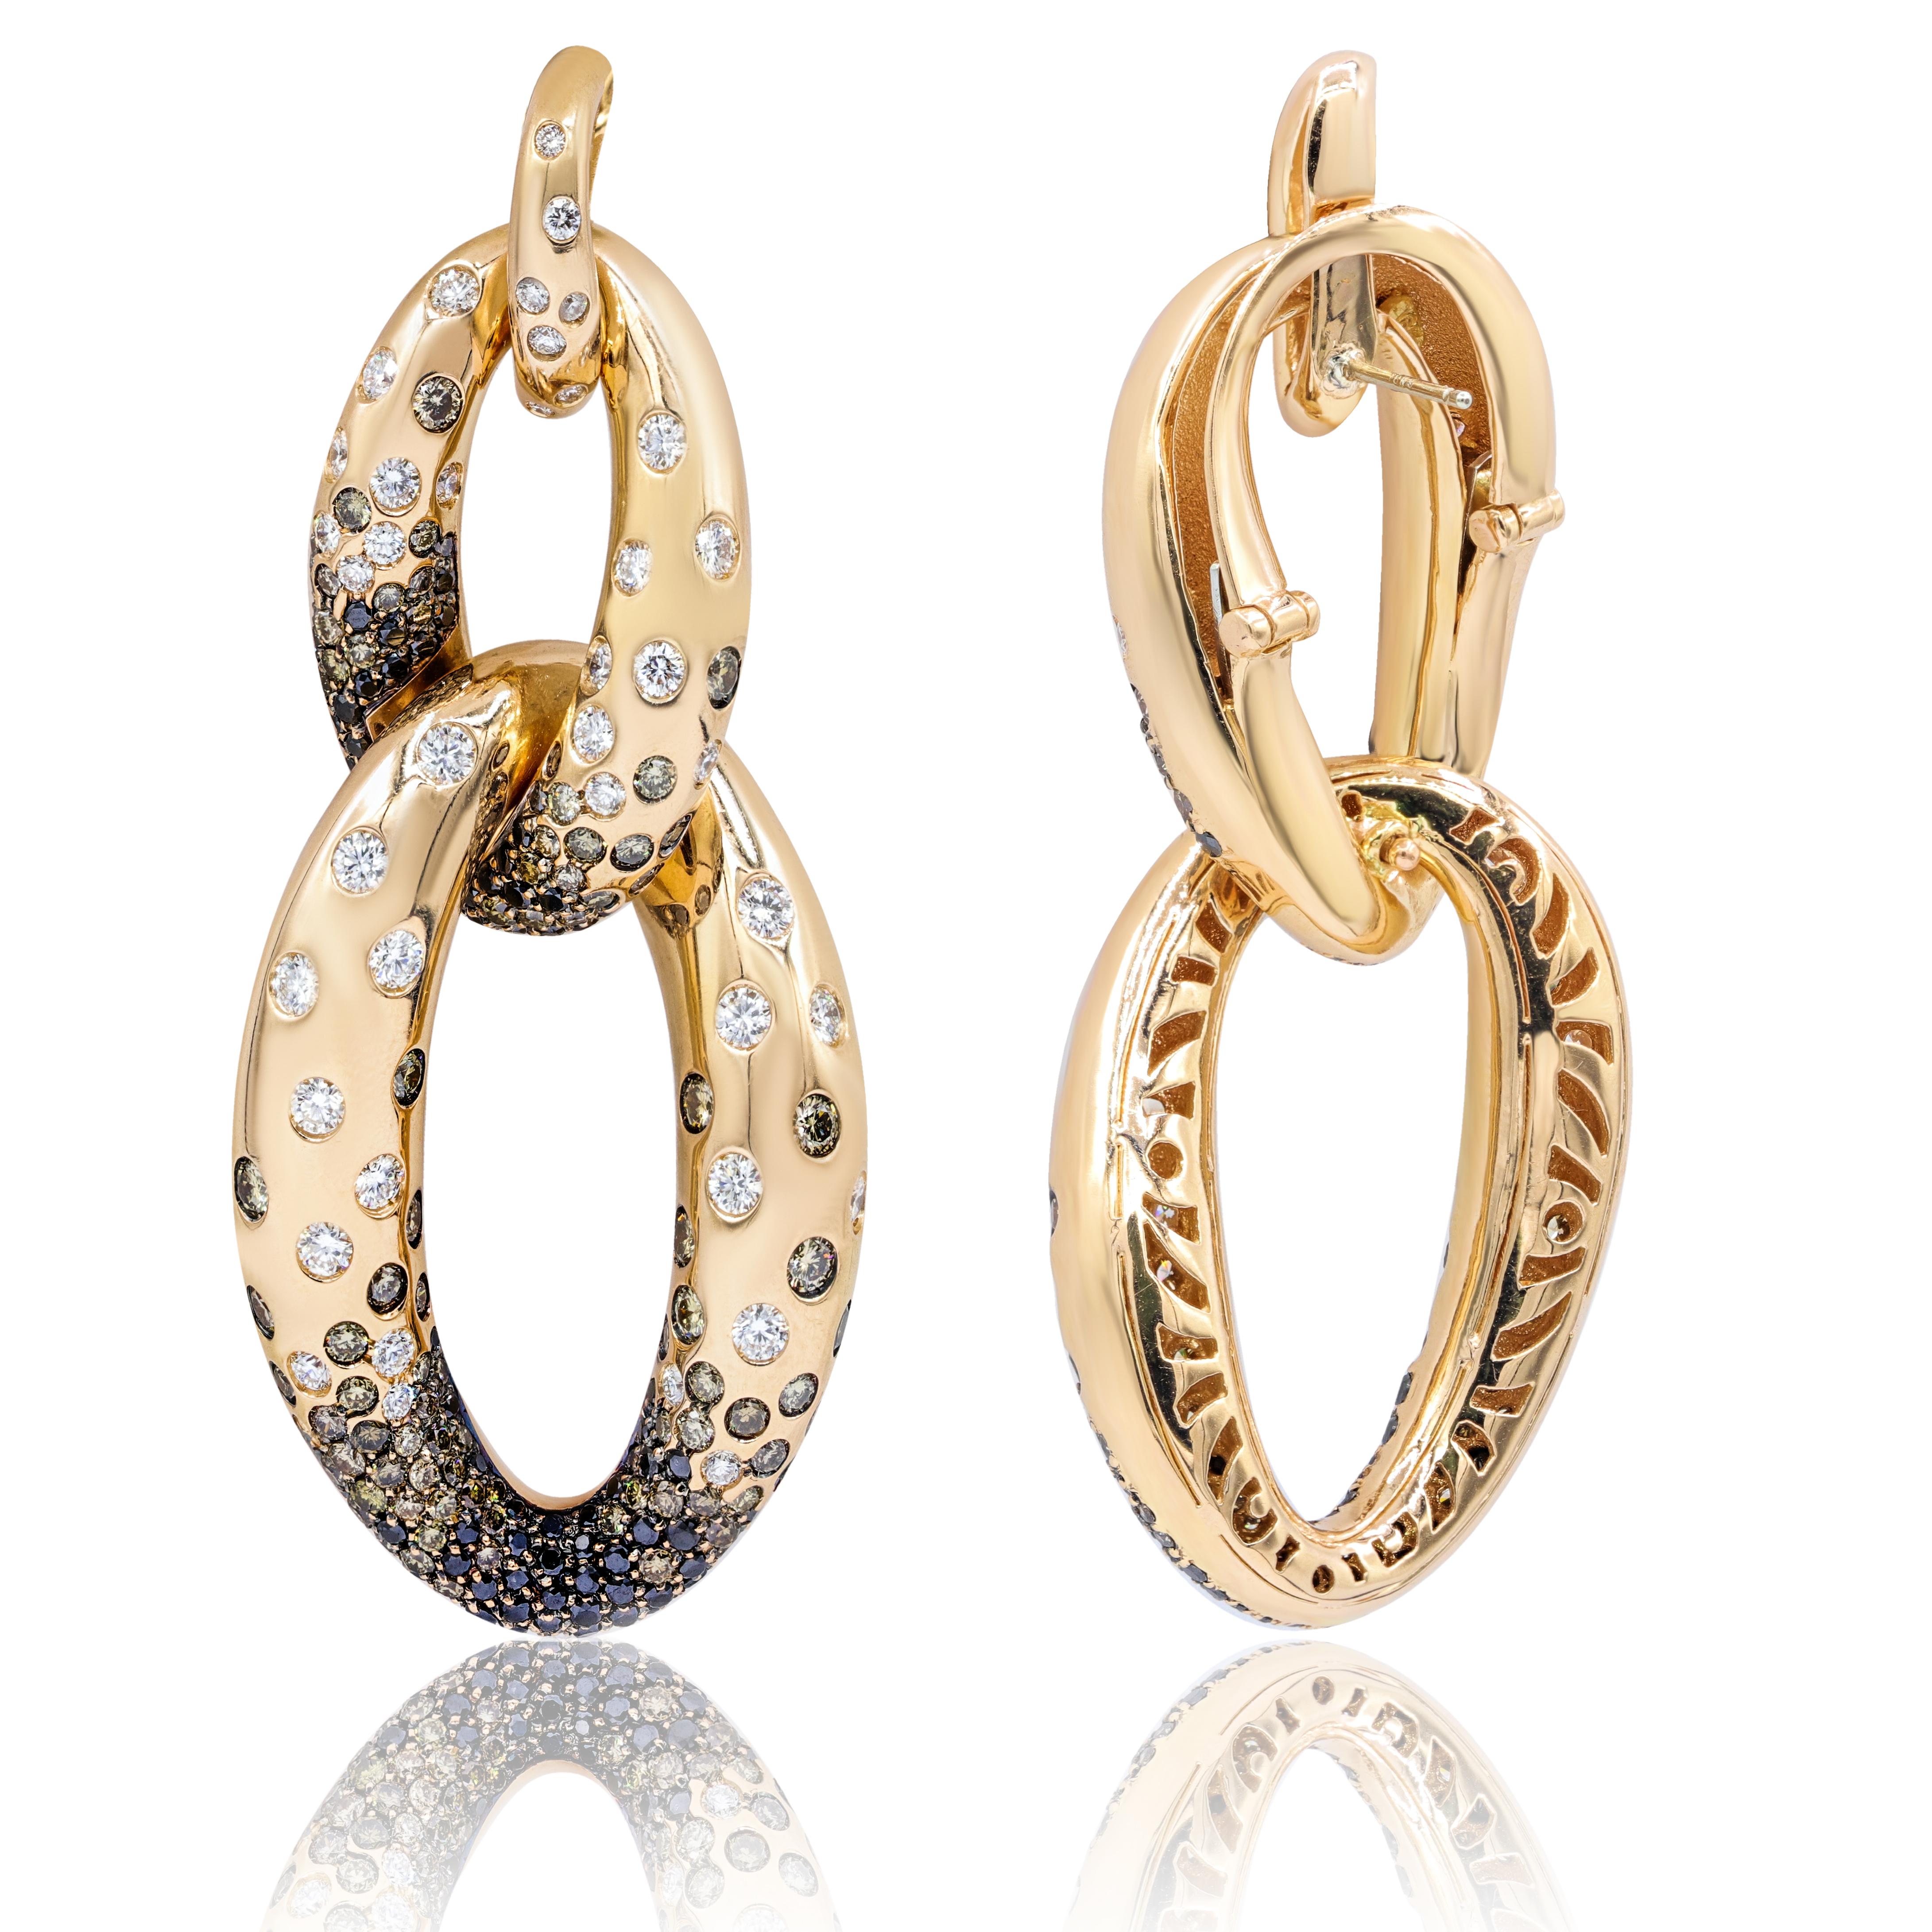 18KT Rose Gold, pave linked earrings, features 8.00 carats of white, champagne and black diamonds